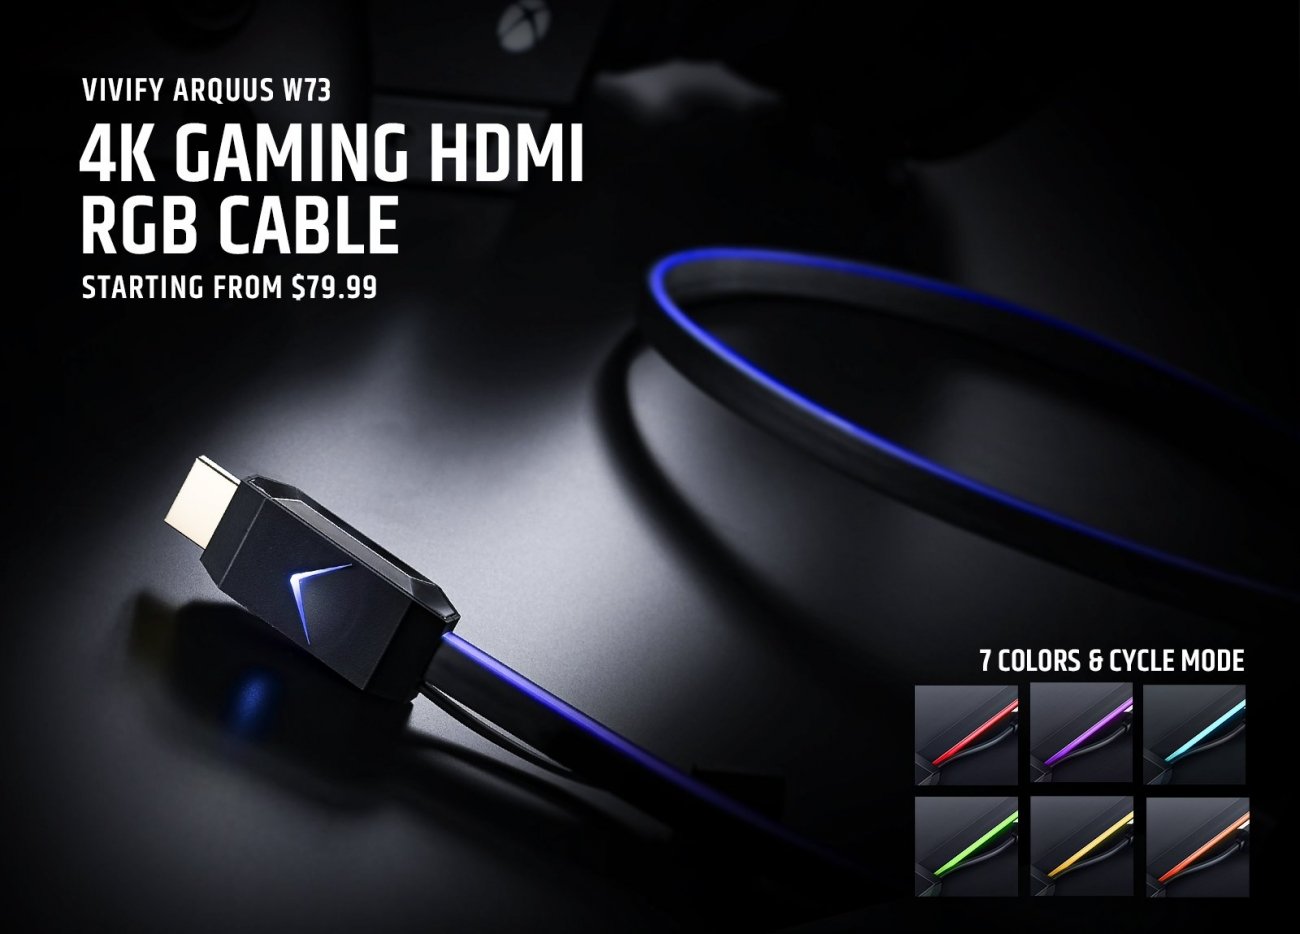 Manifesteren delicaat natuurpark HDMI cable with RGB lighting for up to $200, because why not?